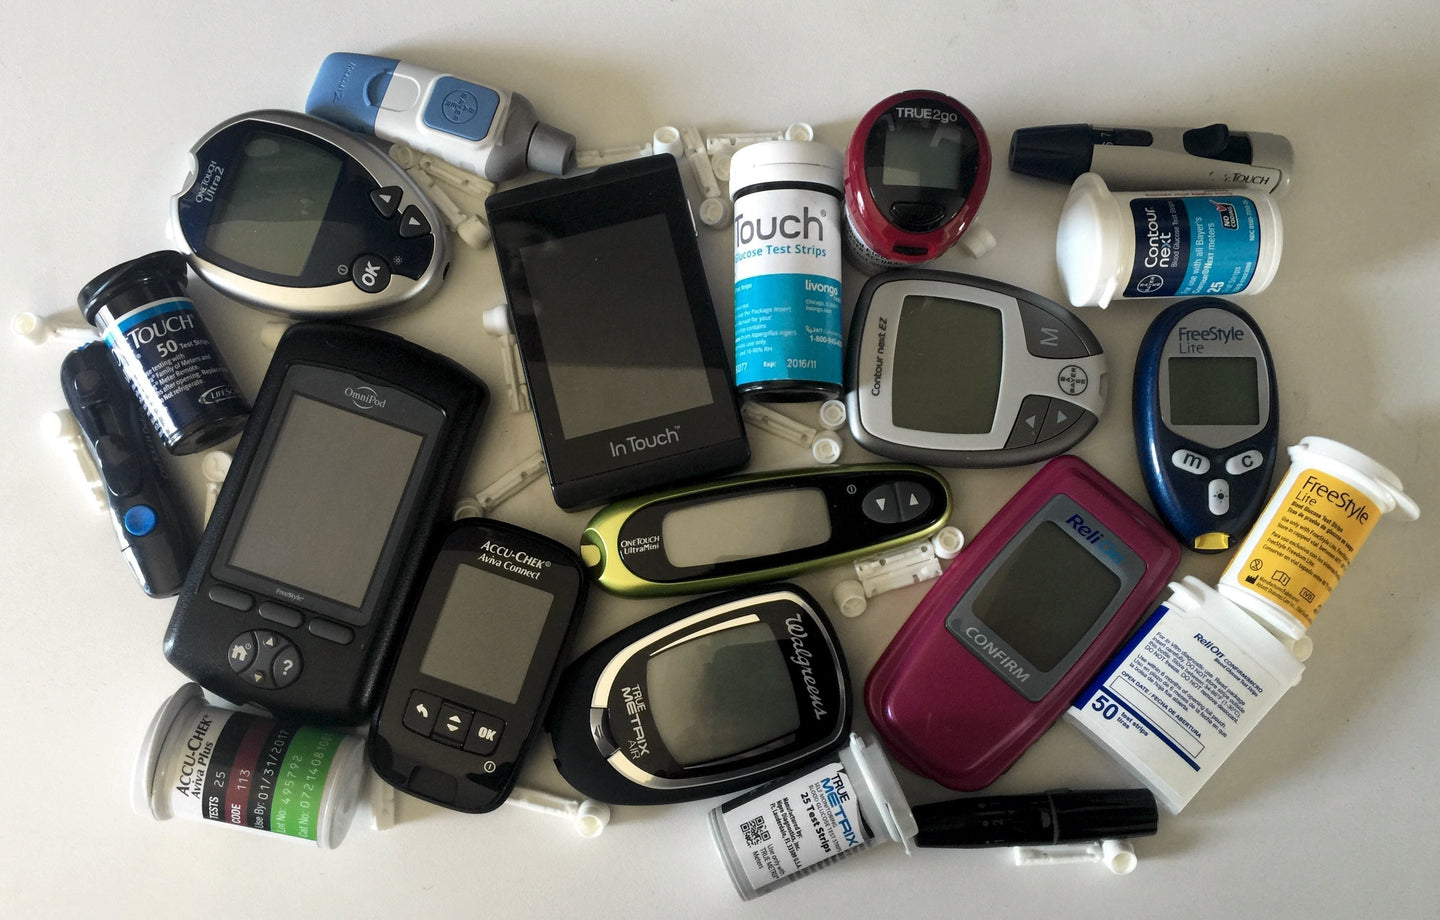 pile of blood glucose meters - blood glucose meter results - real life blood sugars - diabetes blood sugars - best glucose meters - best diabetes test kit - most accurate glucose meter